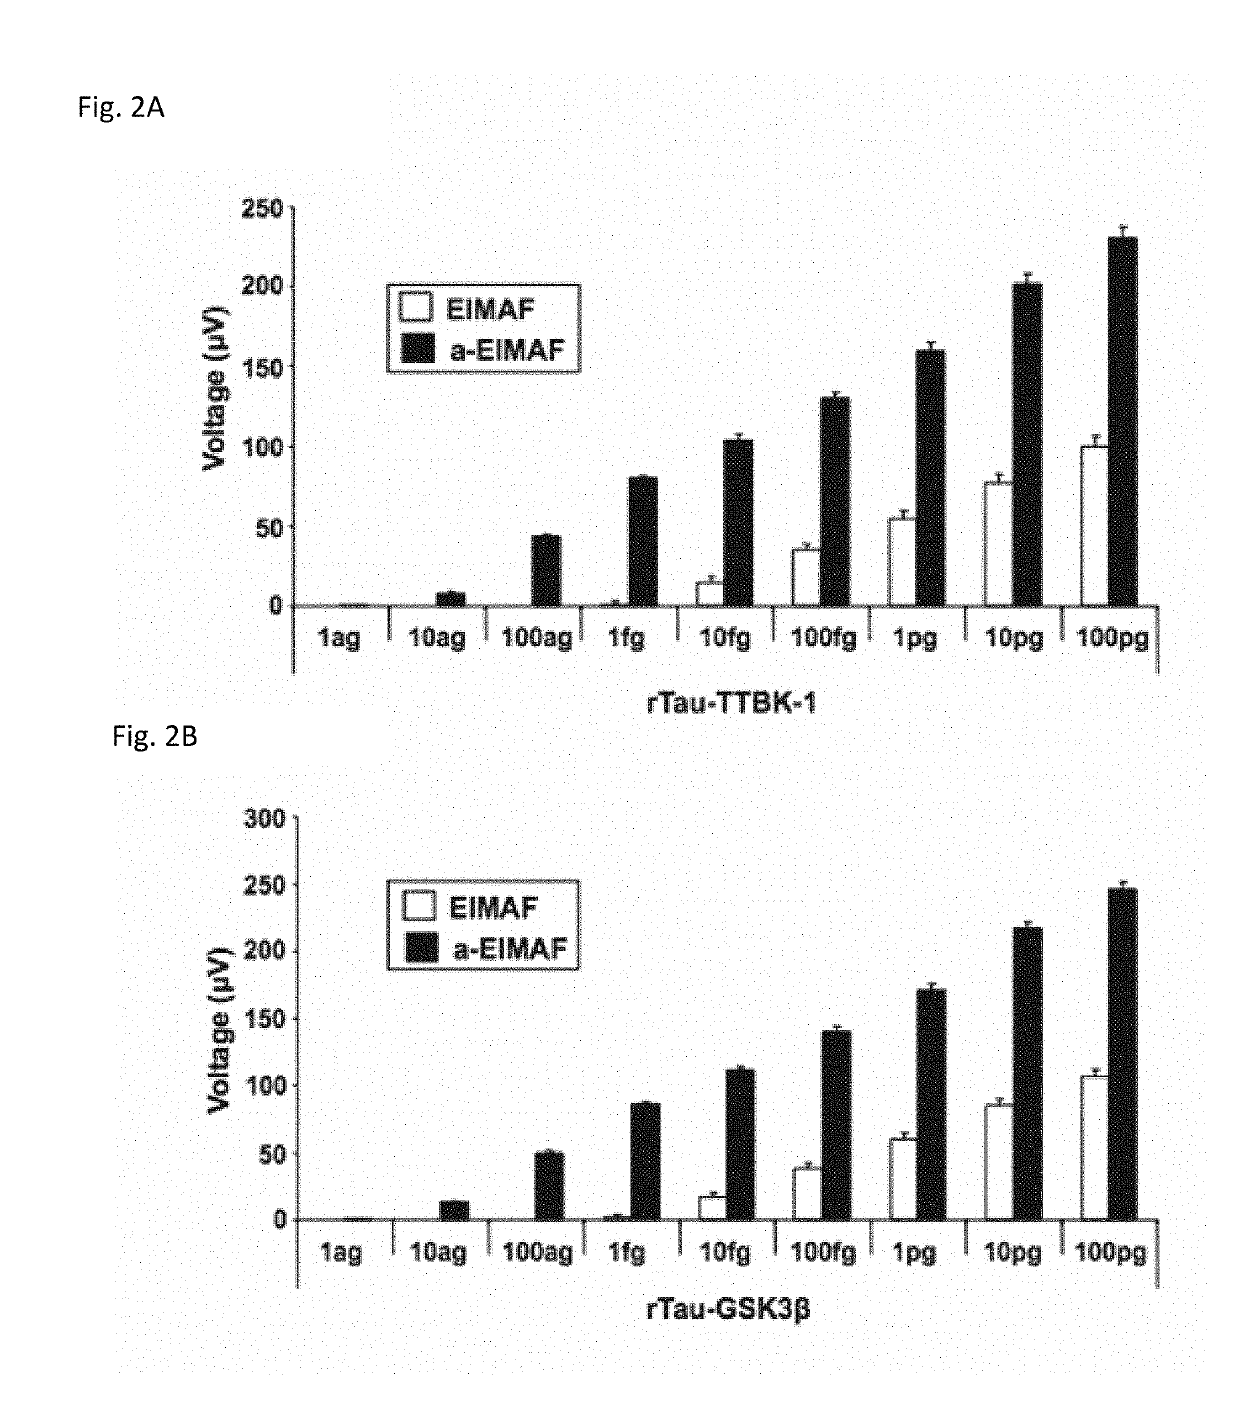 Ultrasensitive assay for tau and methods of use thereof for assessing traumatic brain injury in tissues and biofluids